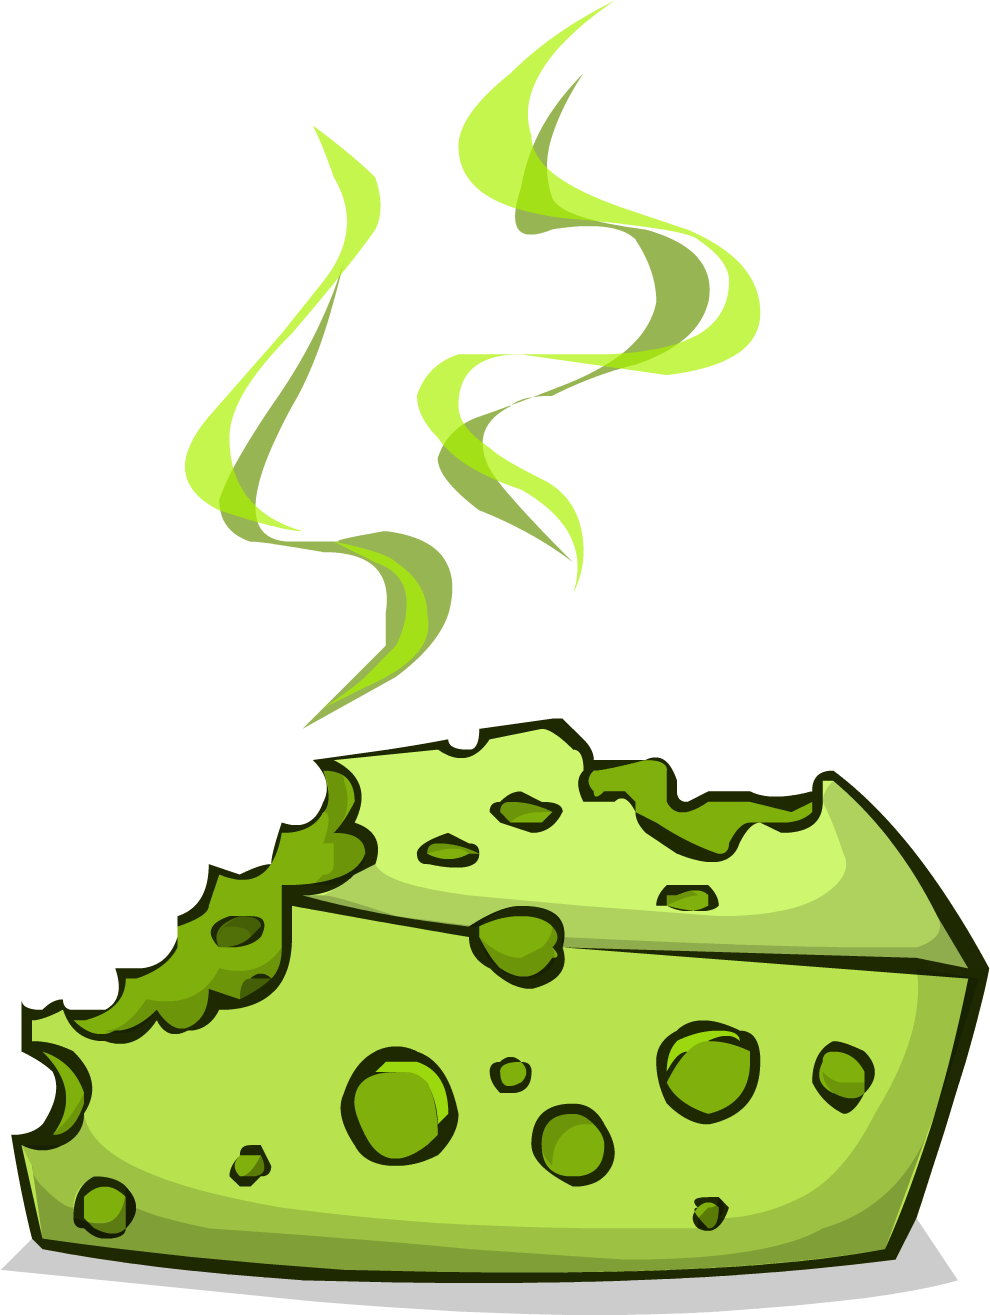 87-870260_stinky-cheese-clipart-stinky-cheese.png